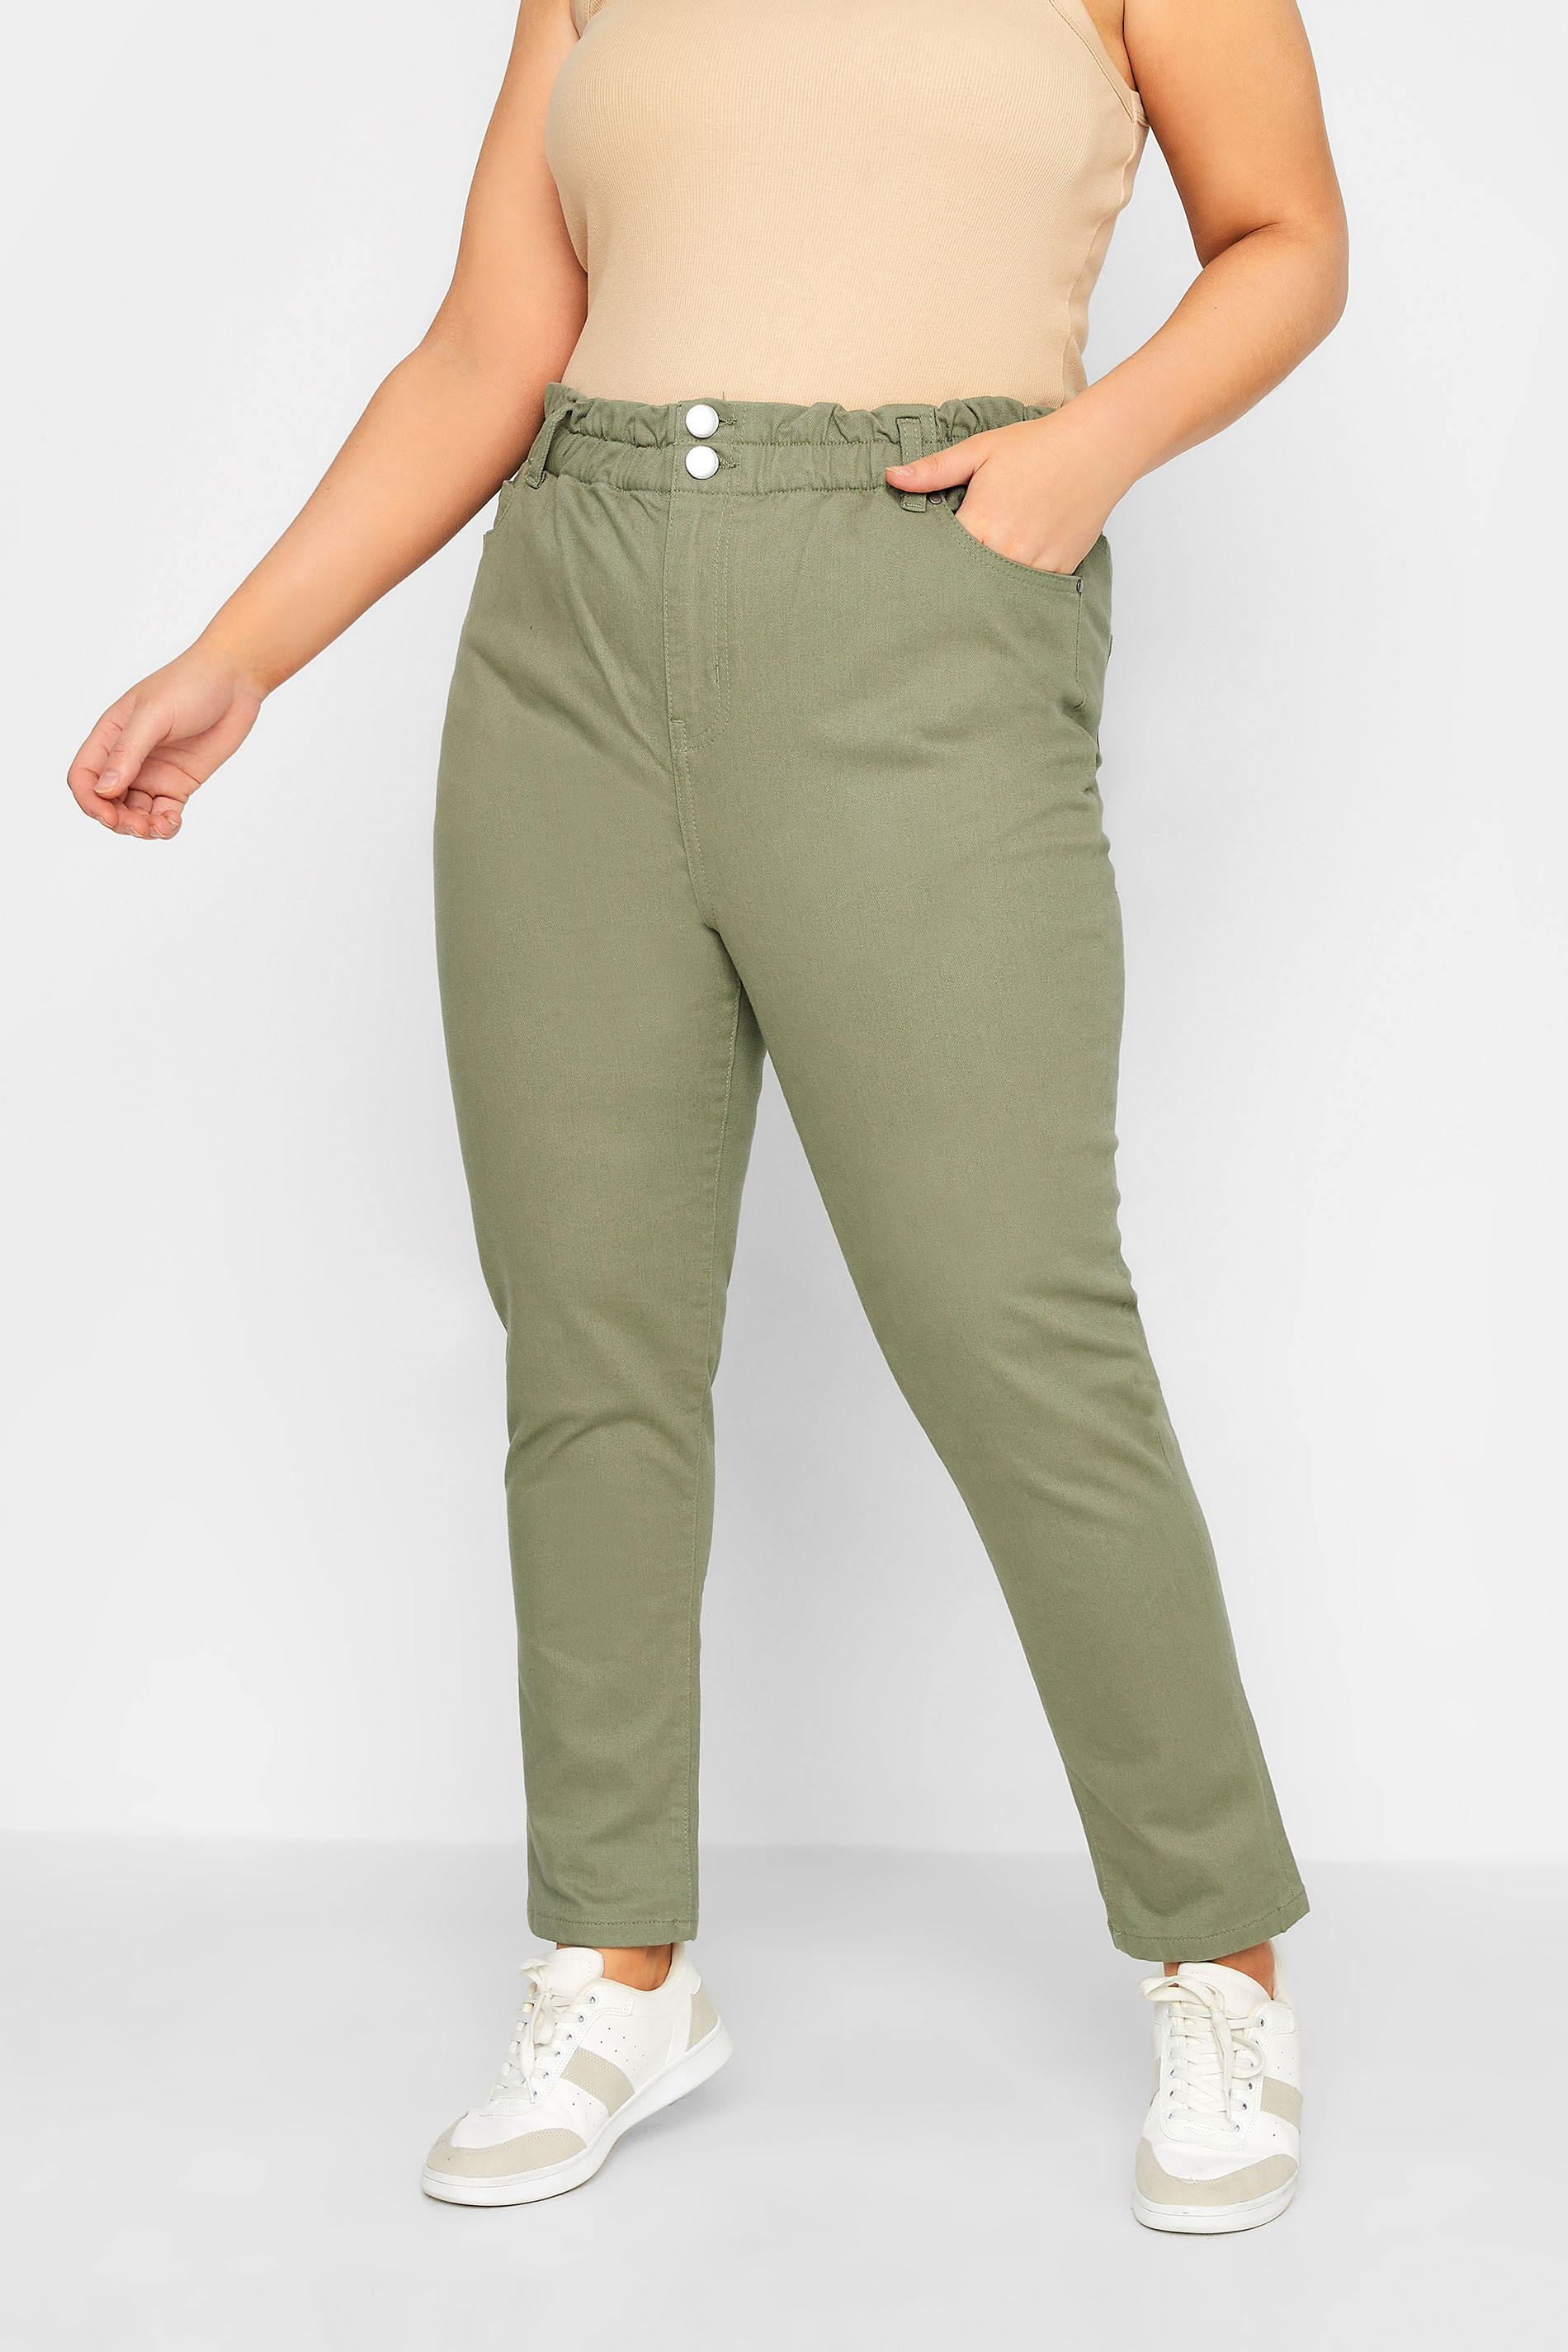 Plus Size Khaki Green Stretch Elasticated Waist MOM Jeans | Yours Clothing 1